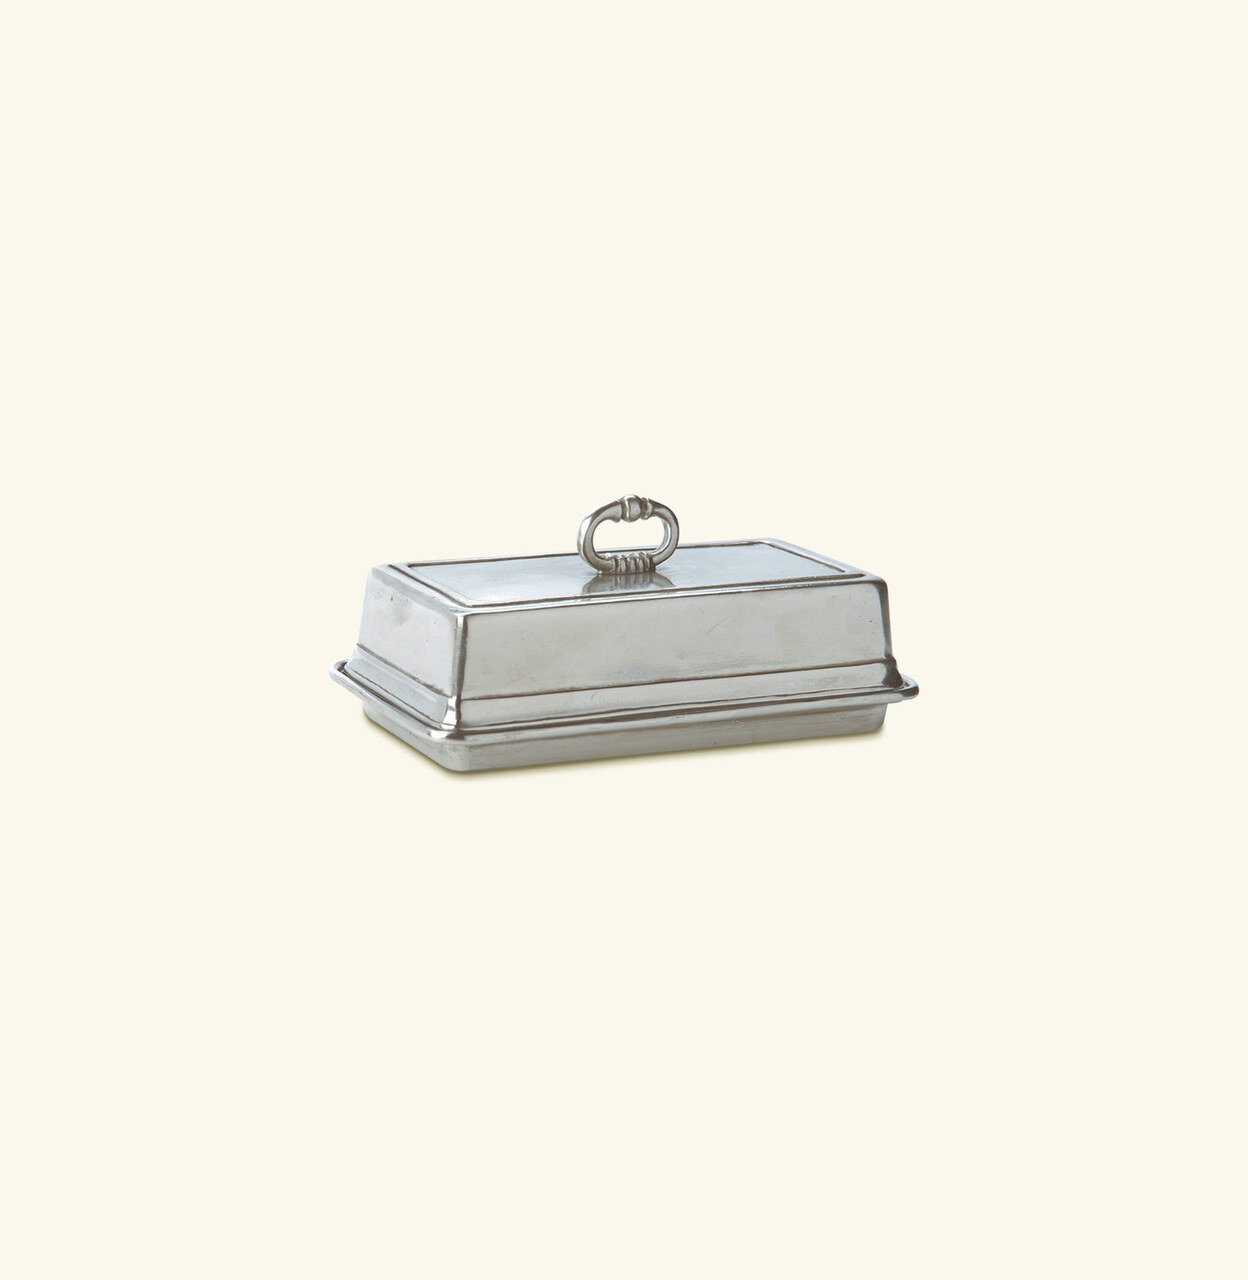 Match Pewter Covered Butter Dish 1140